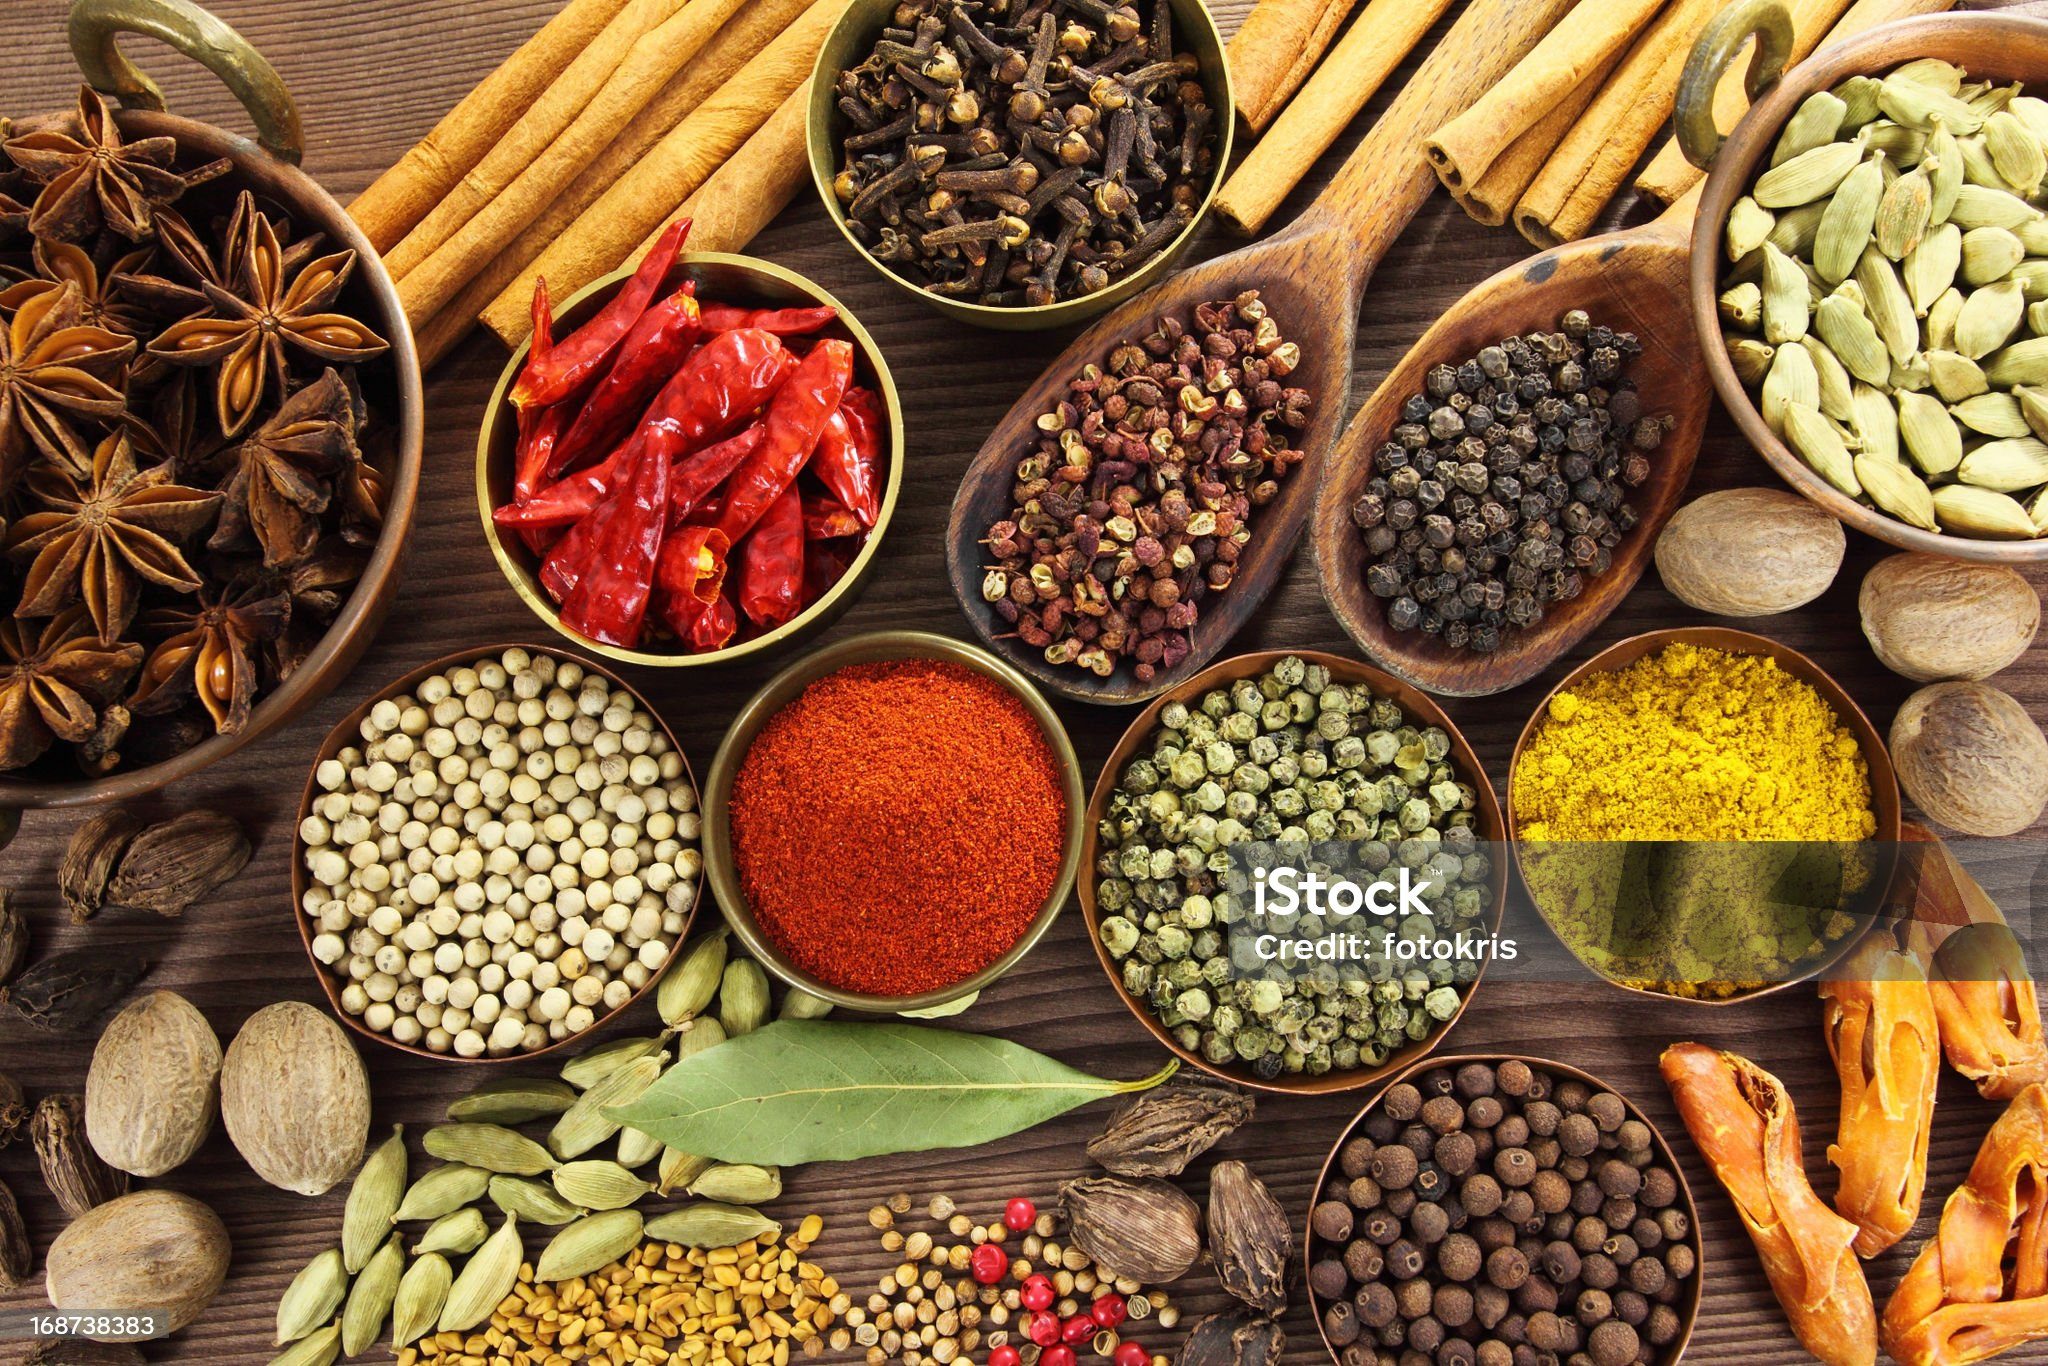 Healthy Spice and Herbs